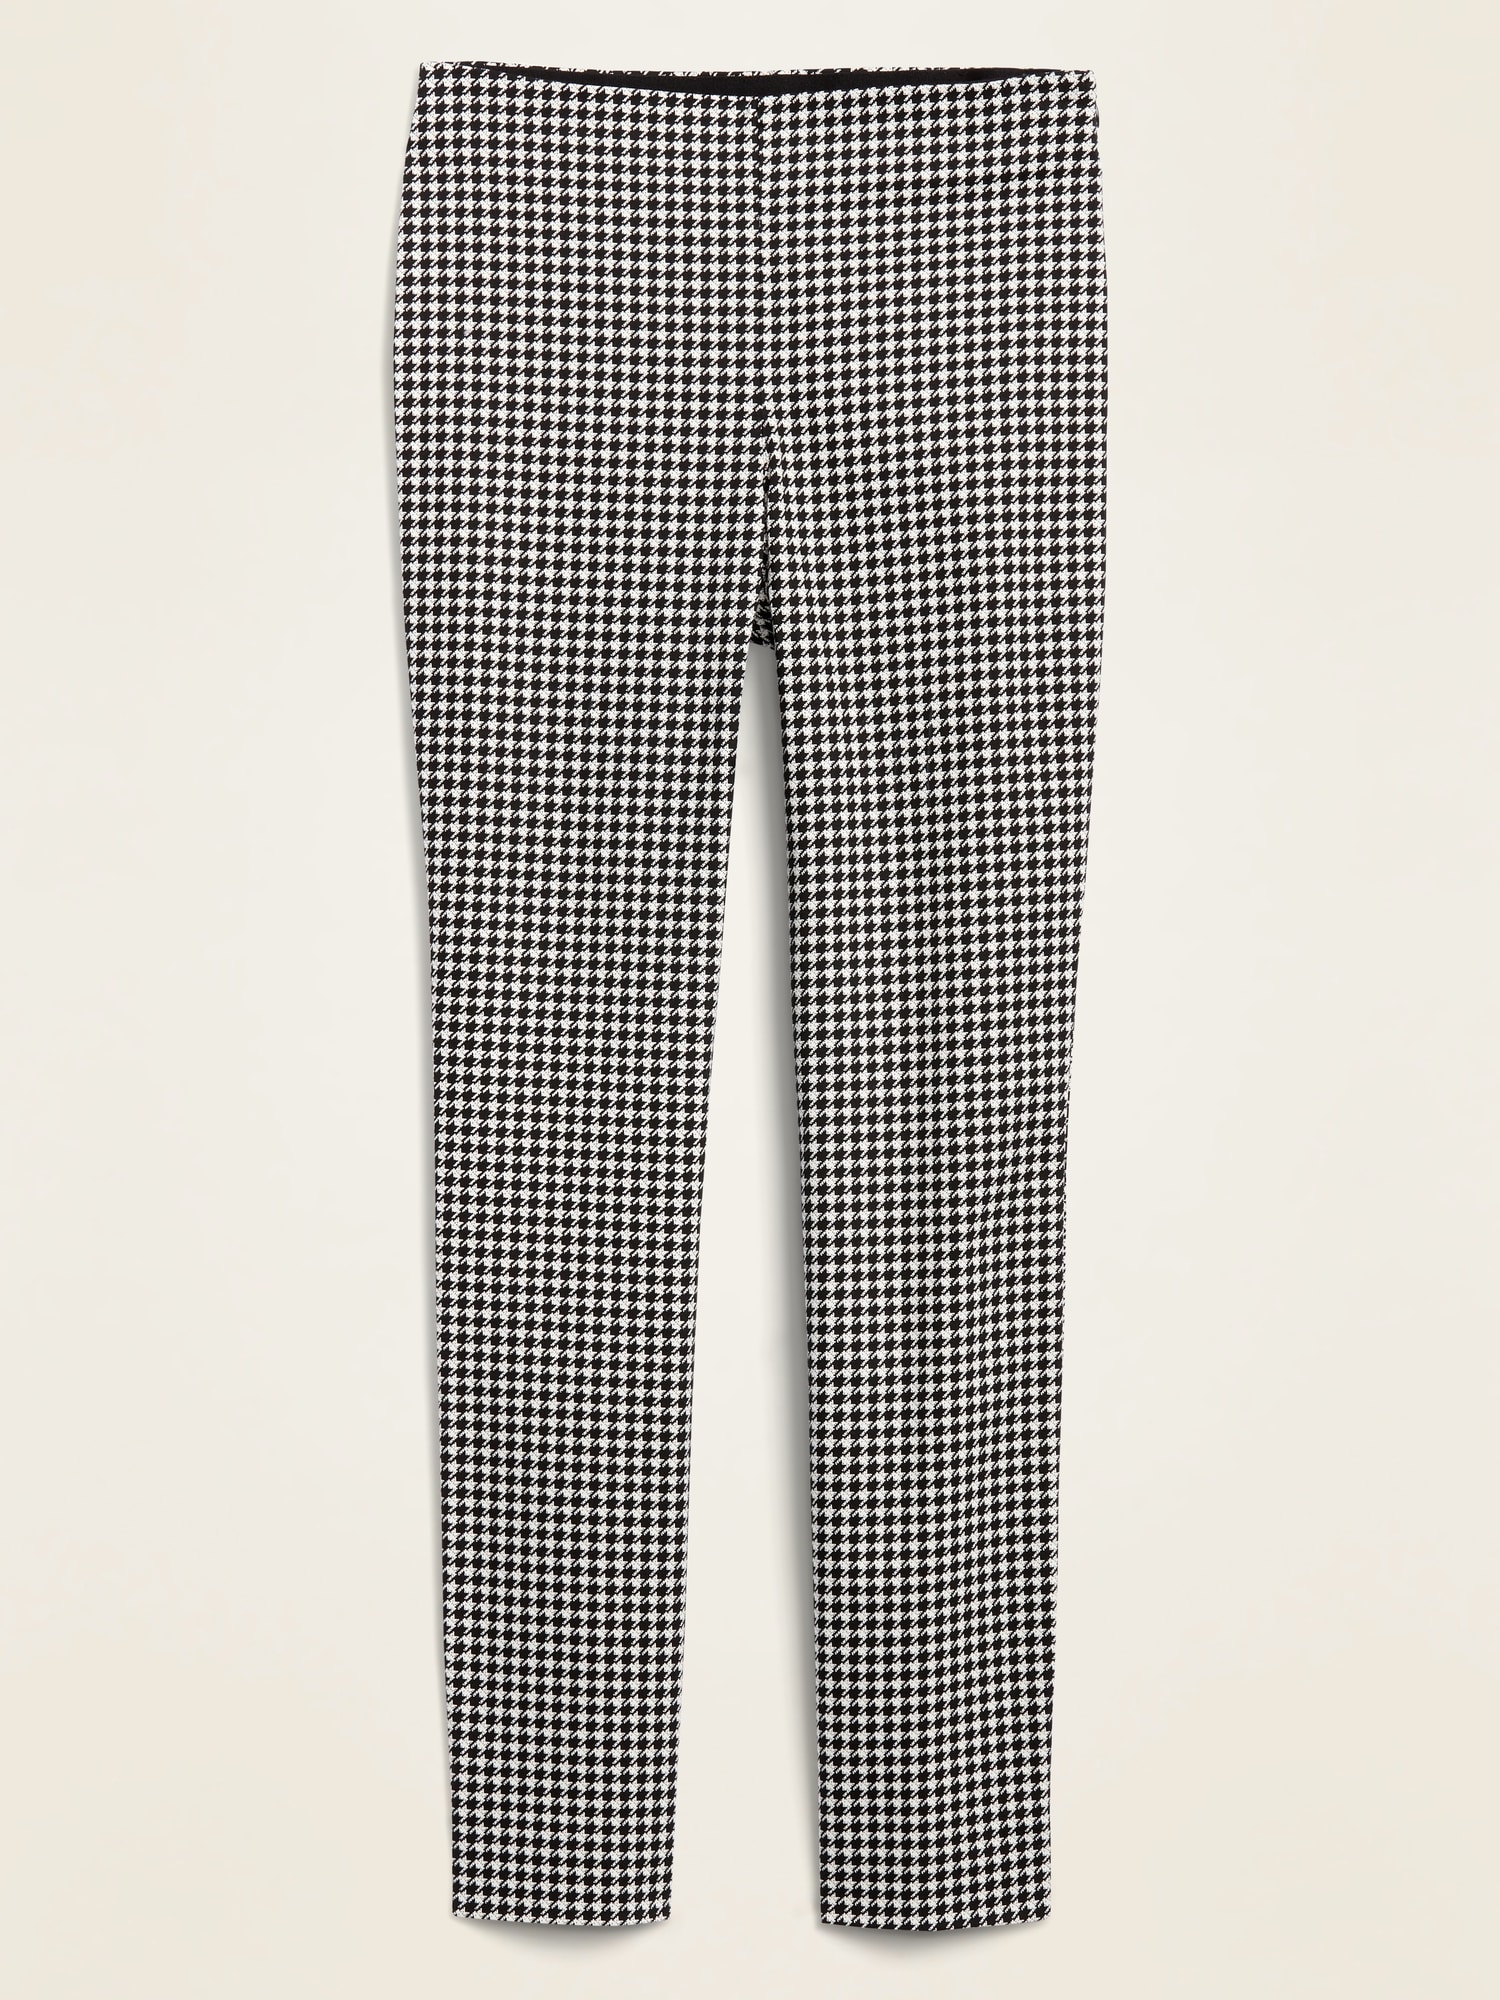 old navy high rise pants